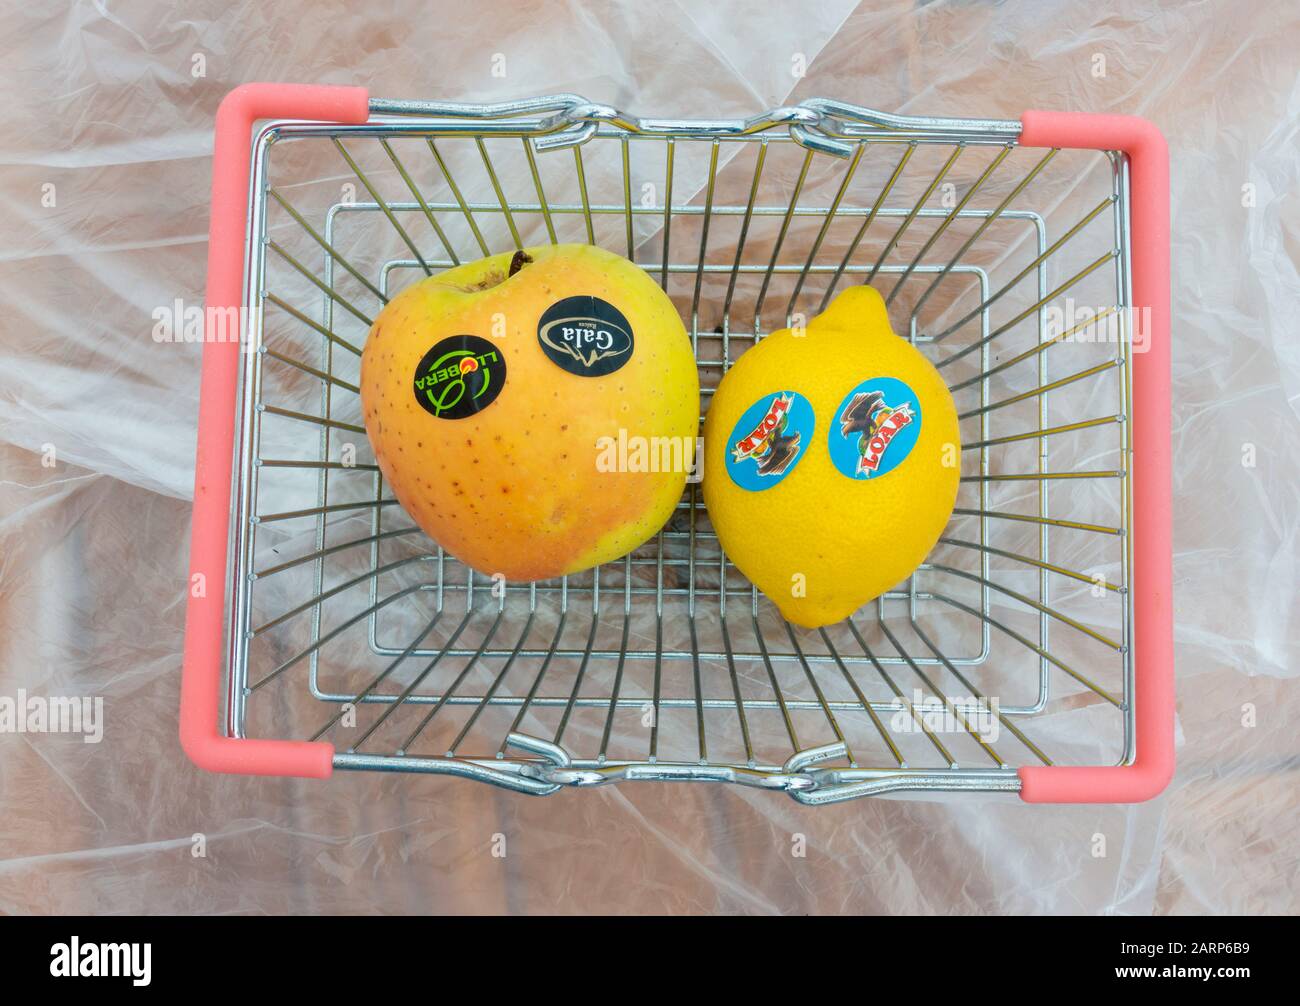 Plastic stickers on supermarket fruit in small basket on thin plastic bags background. Stock Photo